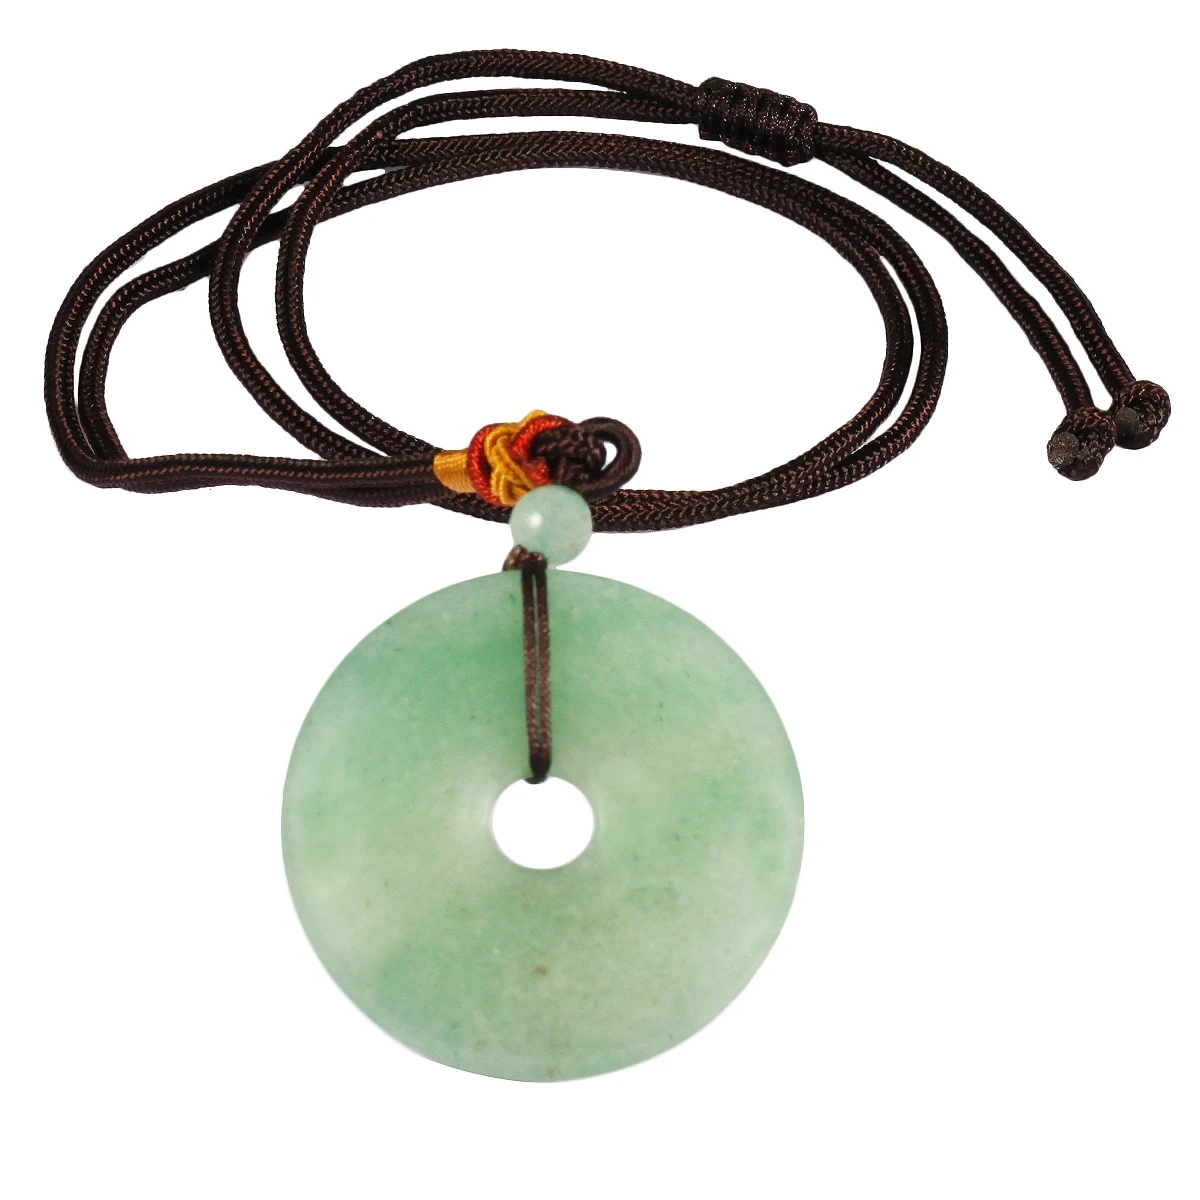 

Healing Crystal Stone Pendant Necklace Natural Green Aventurine Donut Shape Lucky Amulet Adjustable Jewelry For Women Men